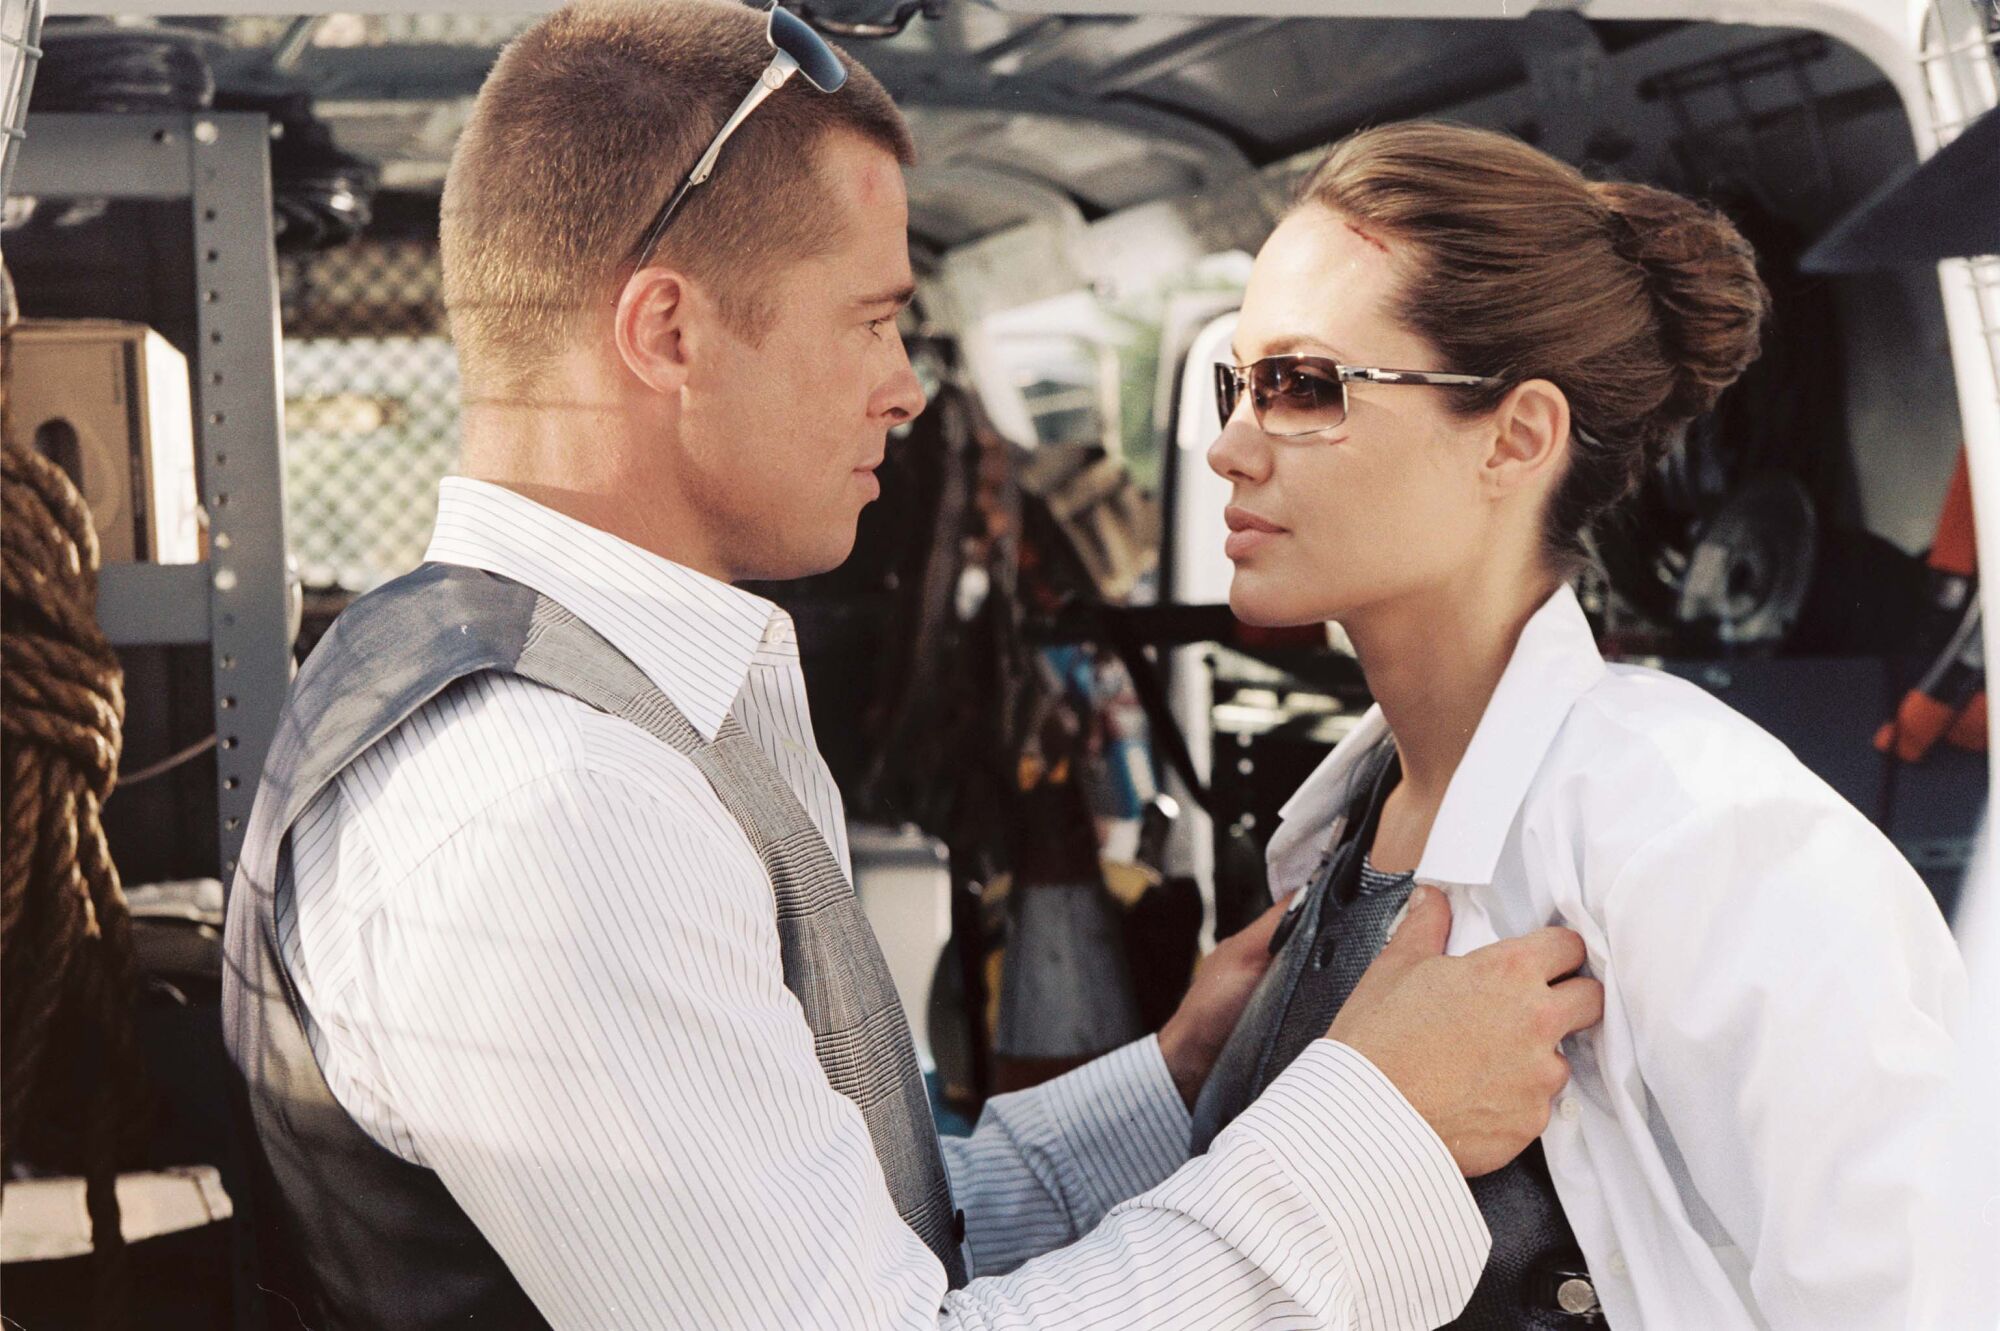 Brad Pitt and Angelina Jolie in the movie "Mr. & Mrs. Smith," which Nigel Hudson choreographed fight scenes for.